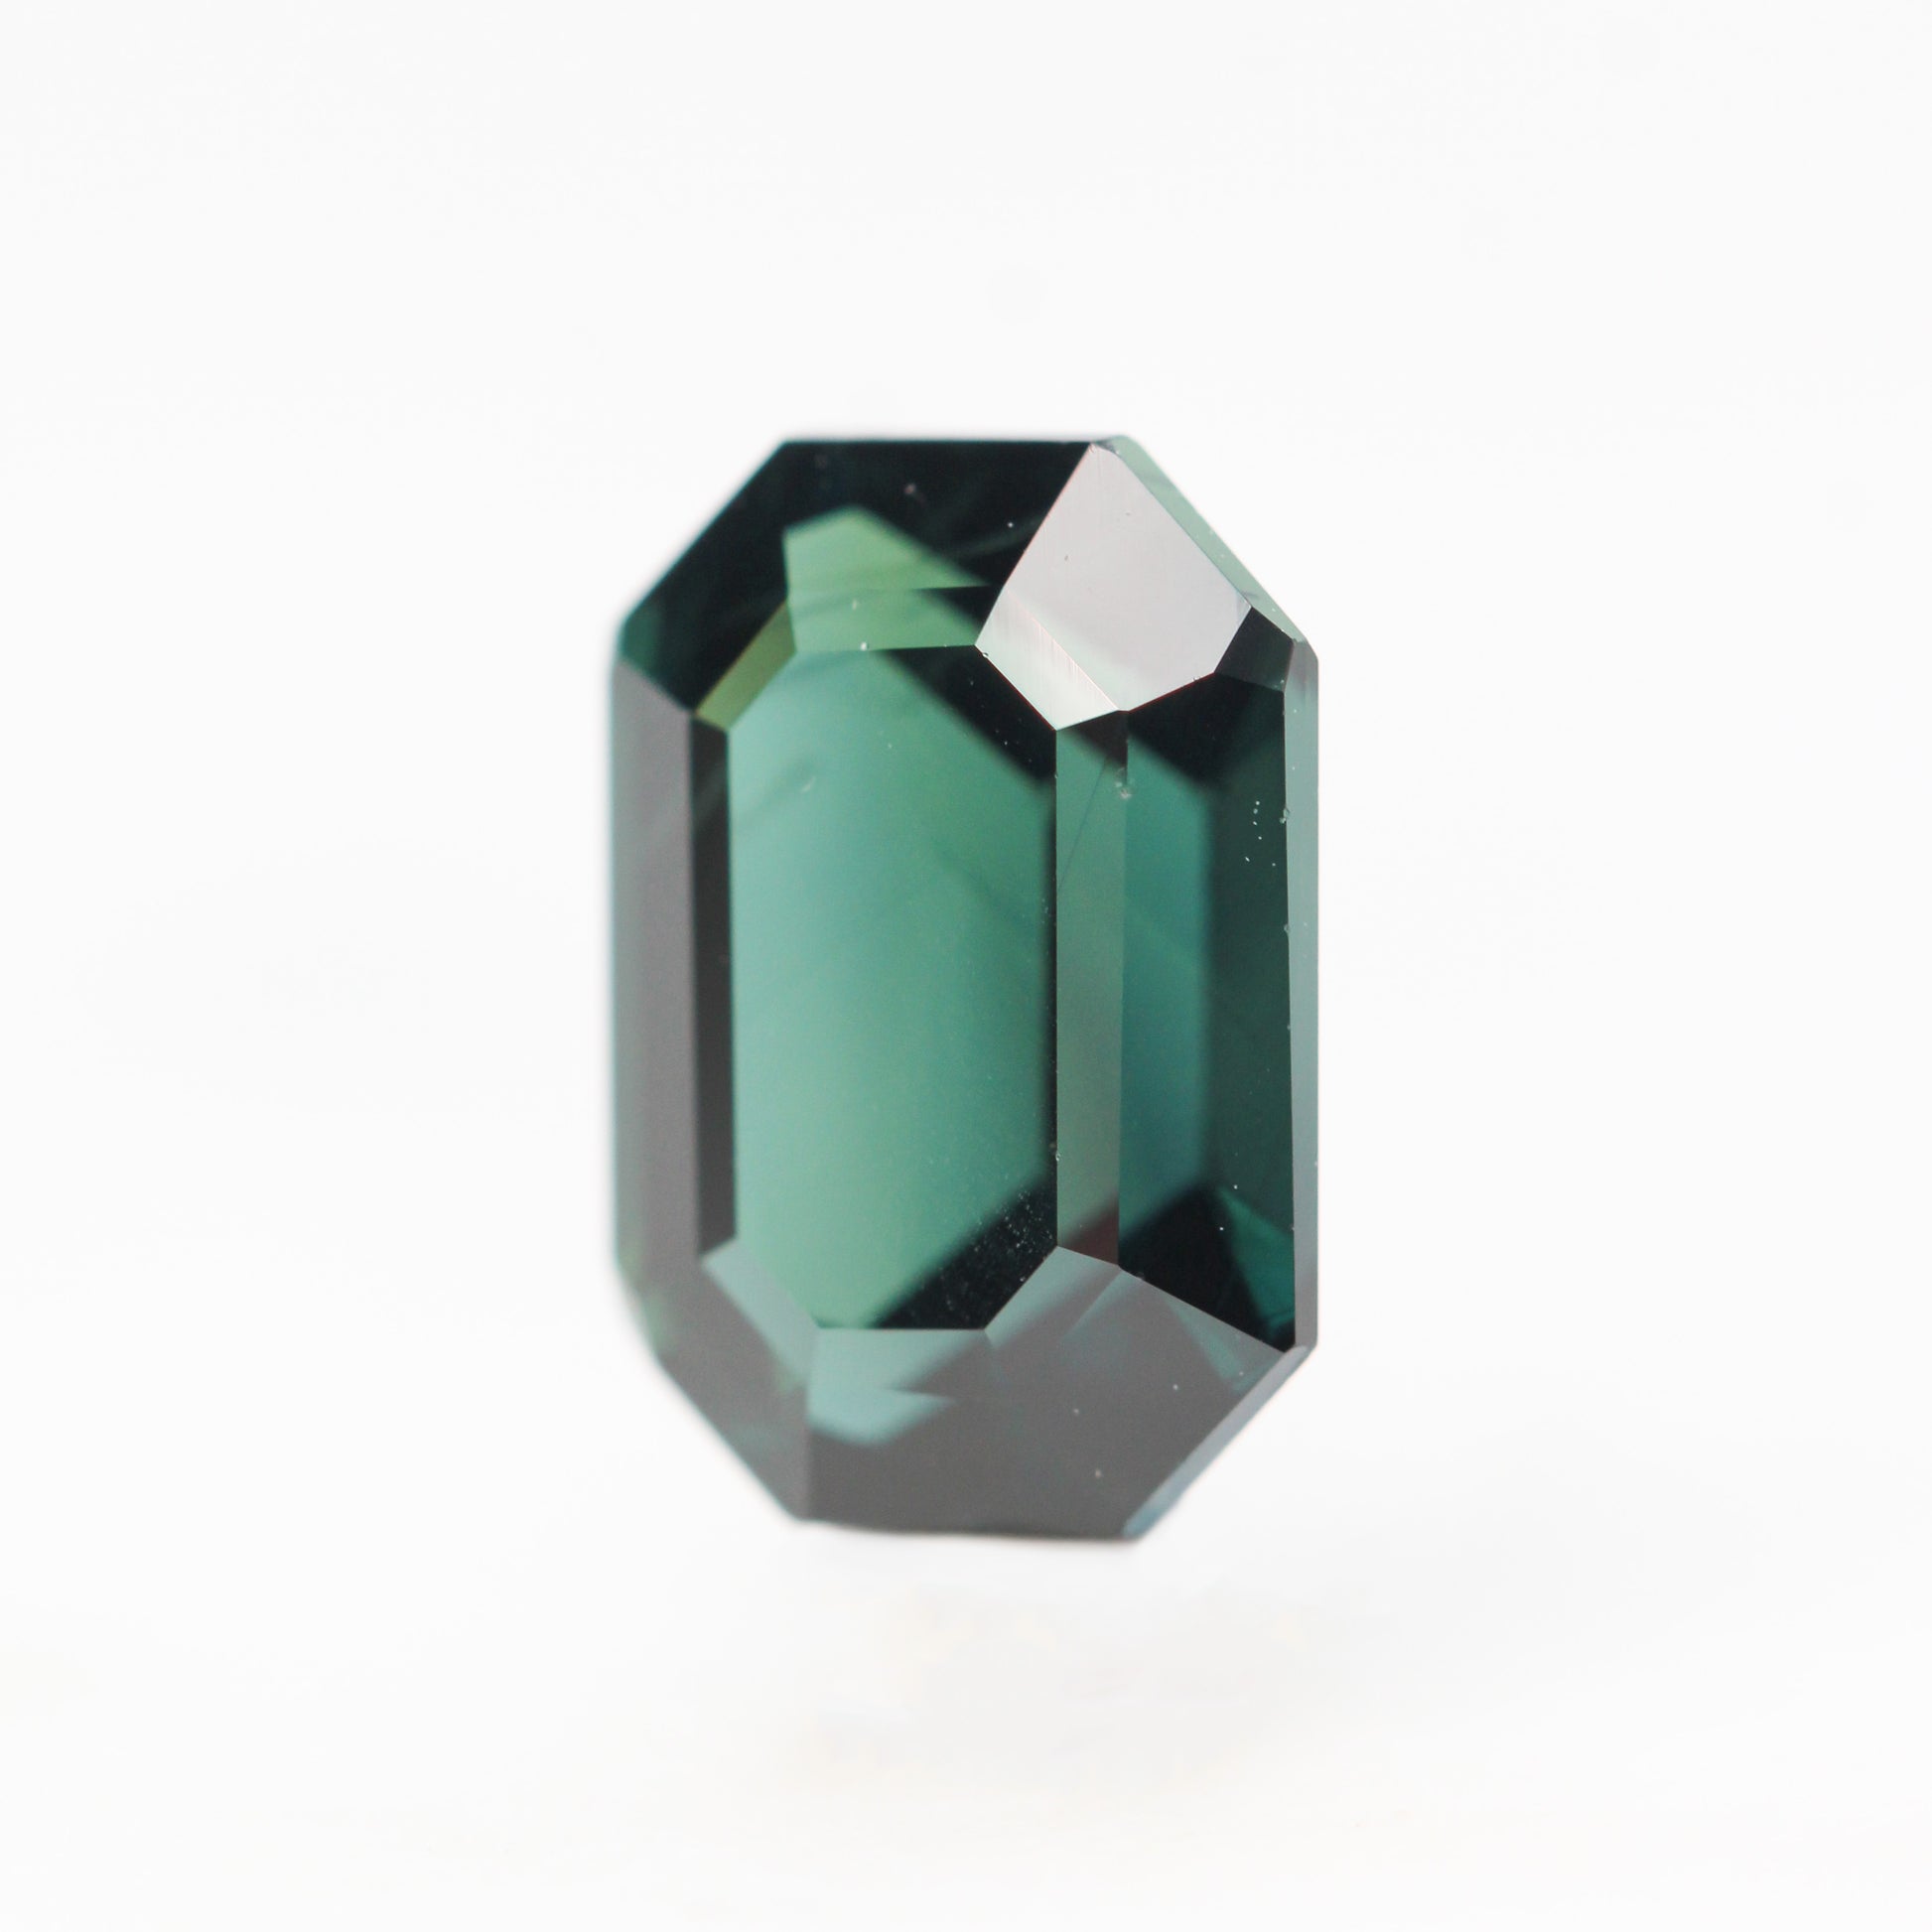 3.30 Carat Asscher Cut Green Sapphire for Custom Work - Inventory Code AGS330 - Midwinter Co. Alternative Bridal Rings and Modern Fine Jewelry